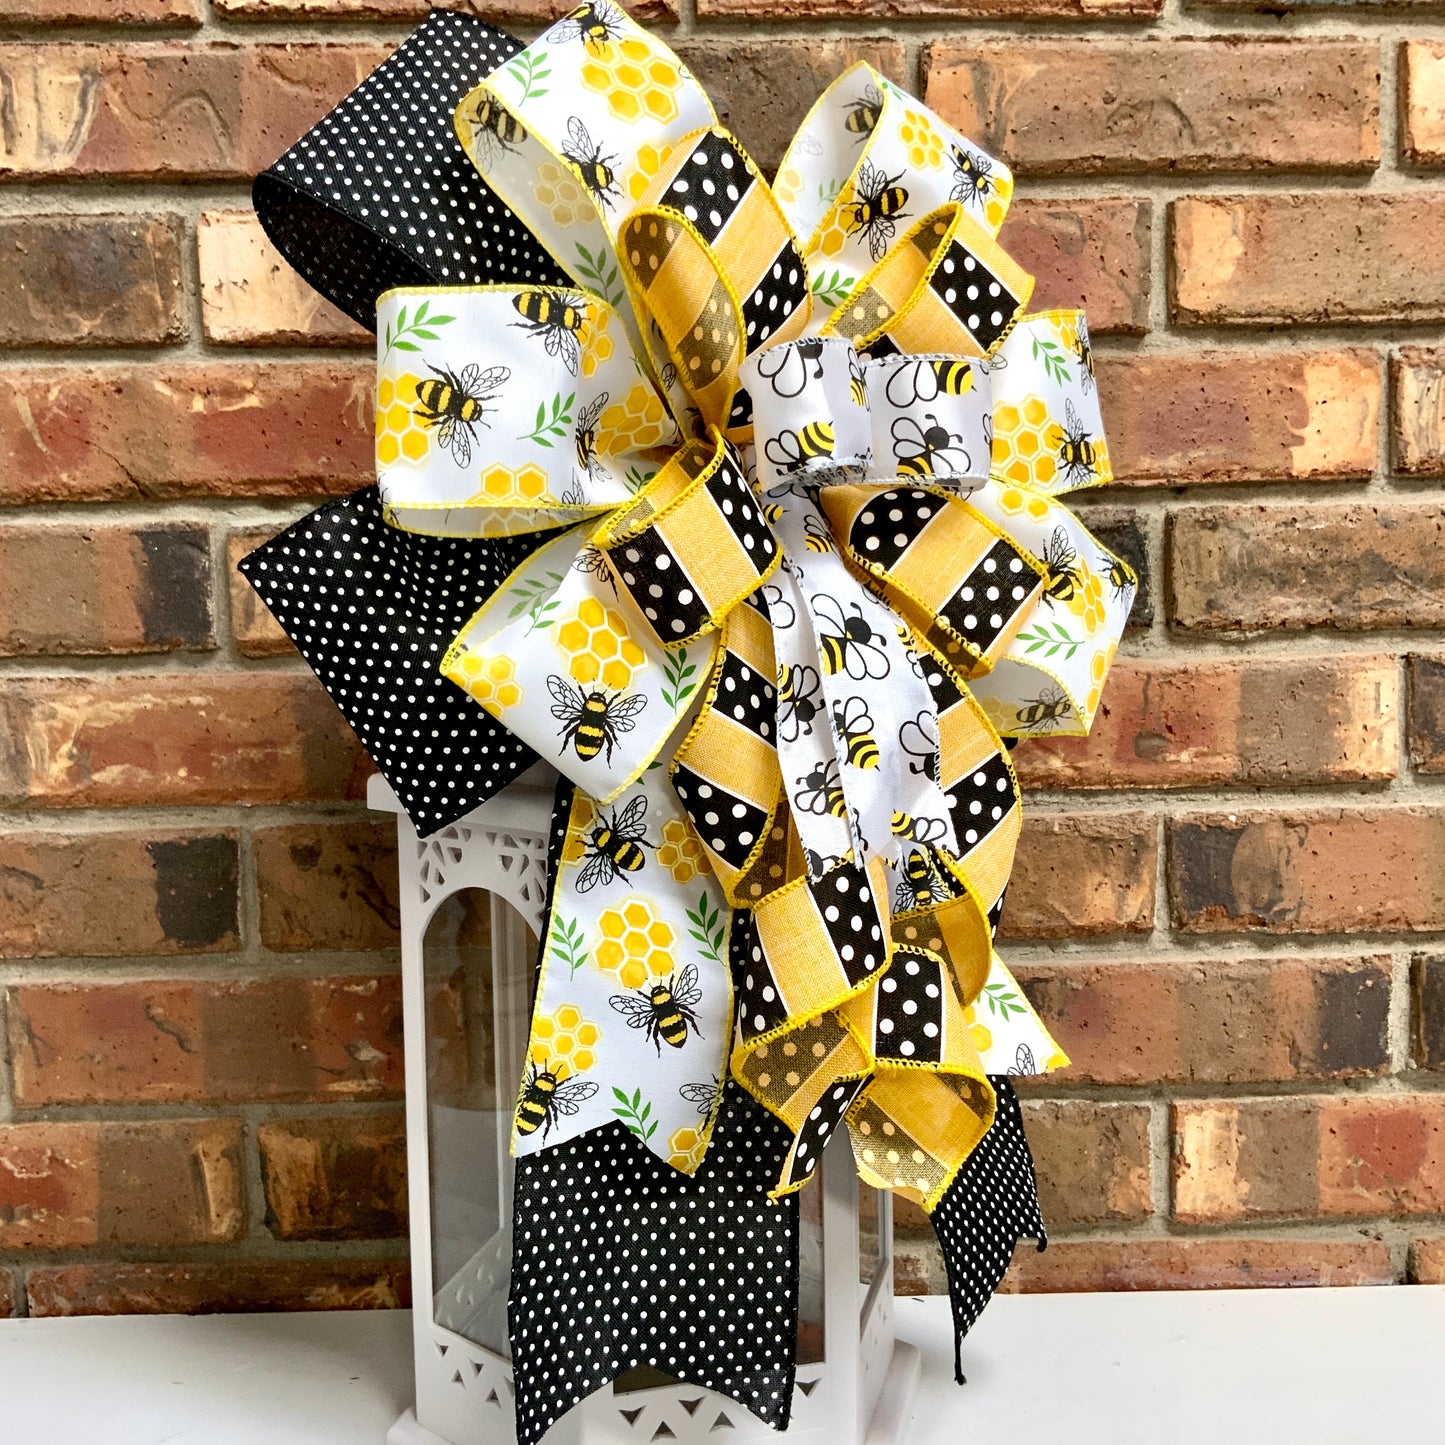 Bumble Bee Bow, Bee Bow, Lantern Bow, Mailbox Bow, Spring Bumble Bee Decor, Bee Hive Decor, Sconce Bow, Bumble Bee Bow For Wreaths